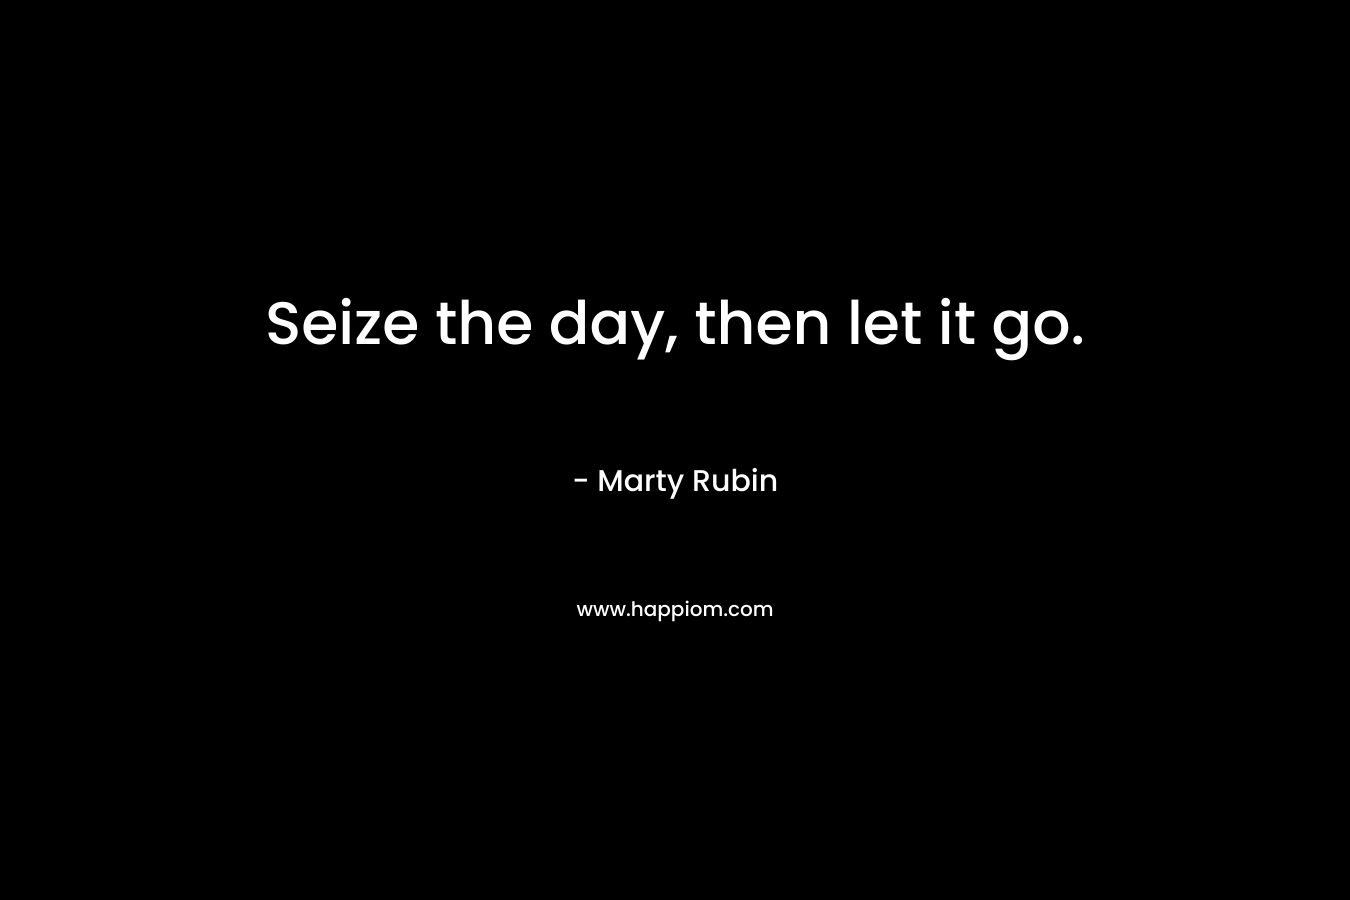 Seize the day, then let it go. – Marty Rubin